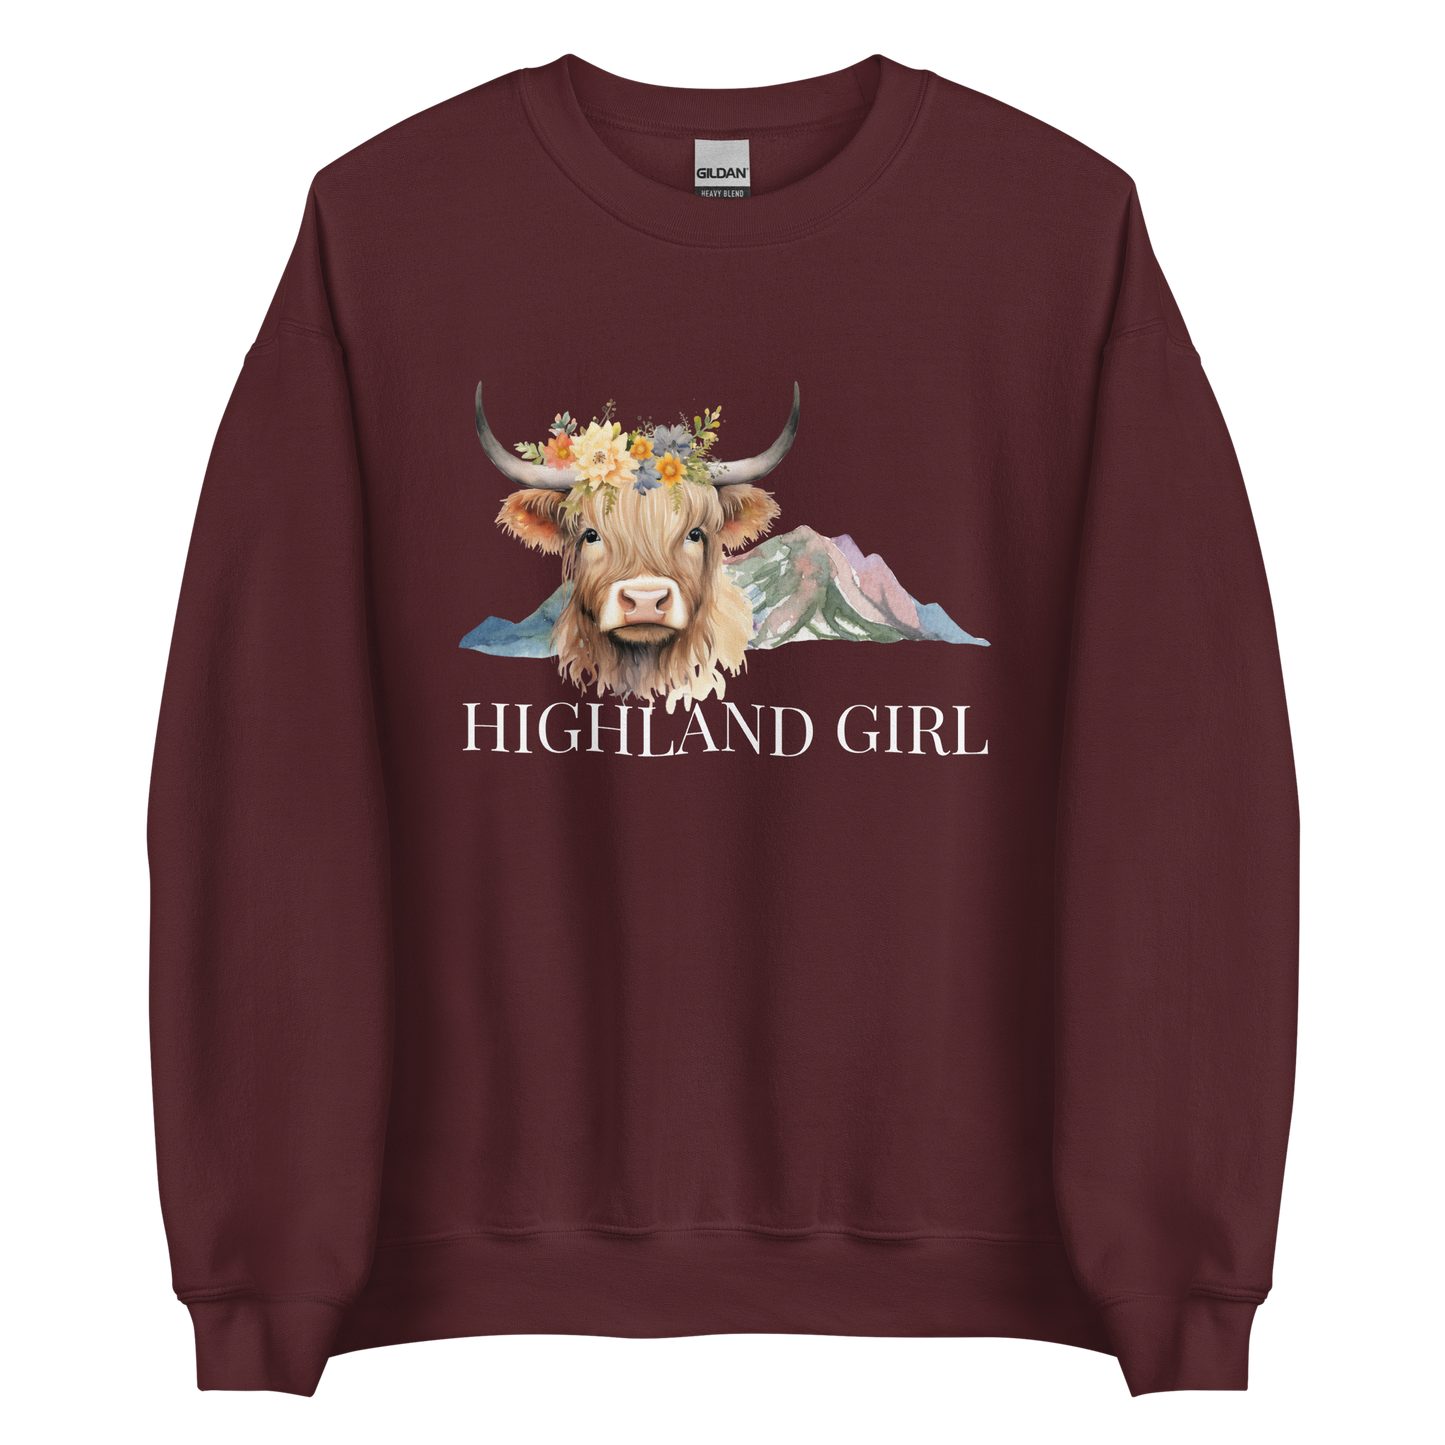 Maroon Highland Cow Sweatshirt featuring an adorable Highland Girl graphic on the chest - Cute Graphic Highland Cow Sweatshirts - Boozy Fox